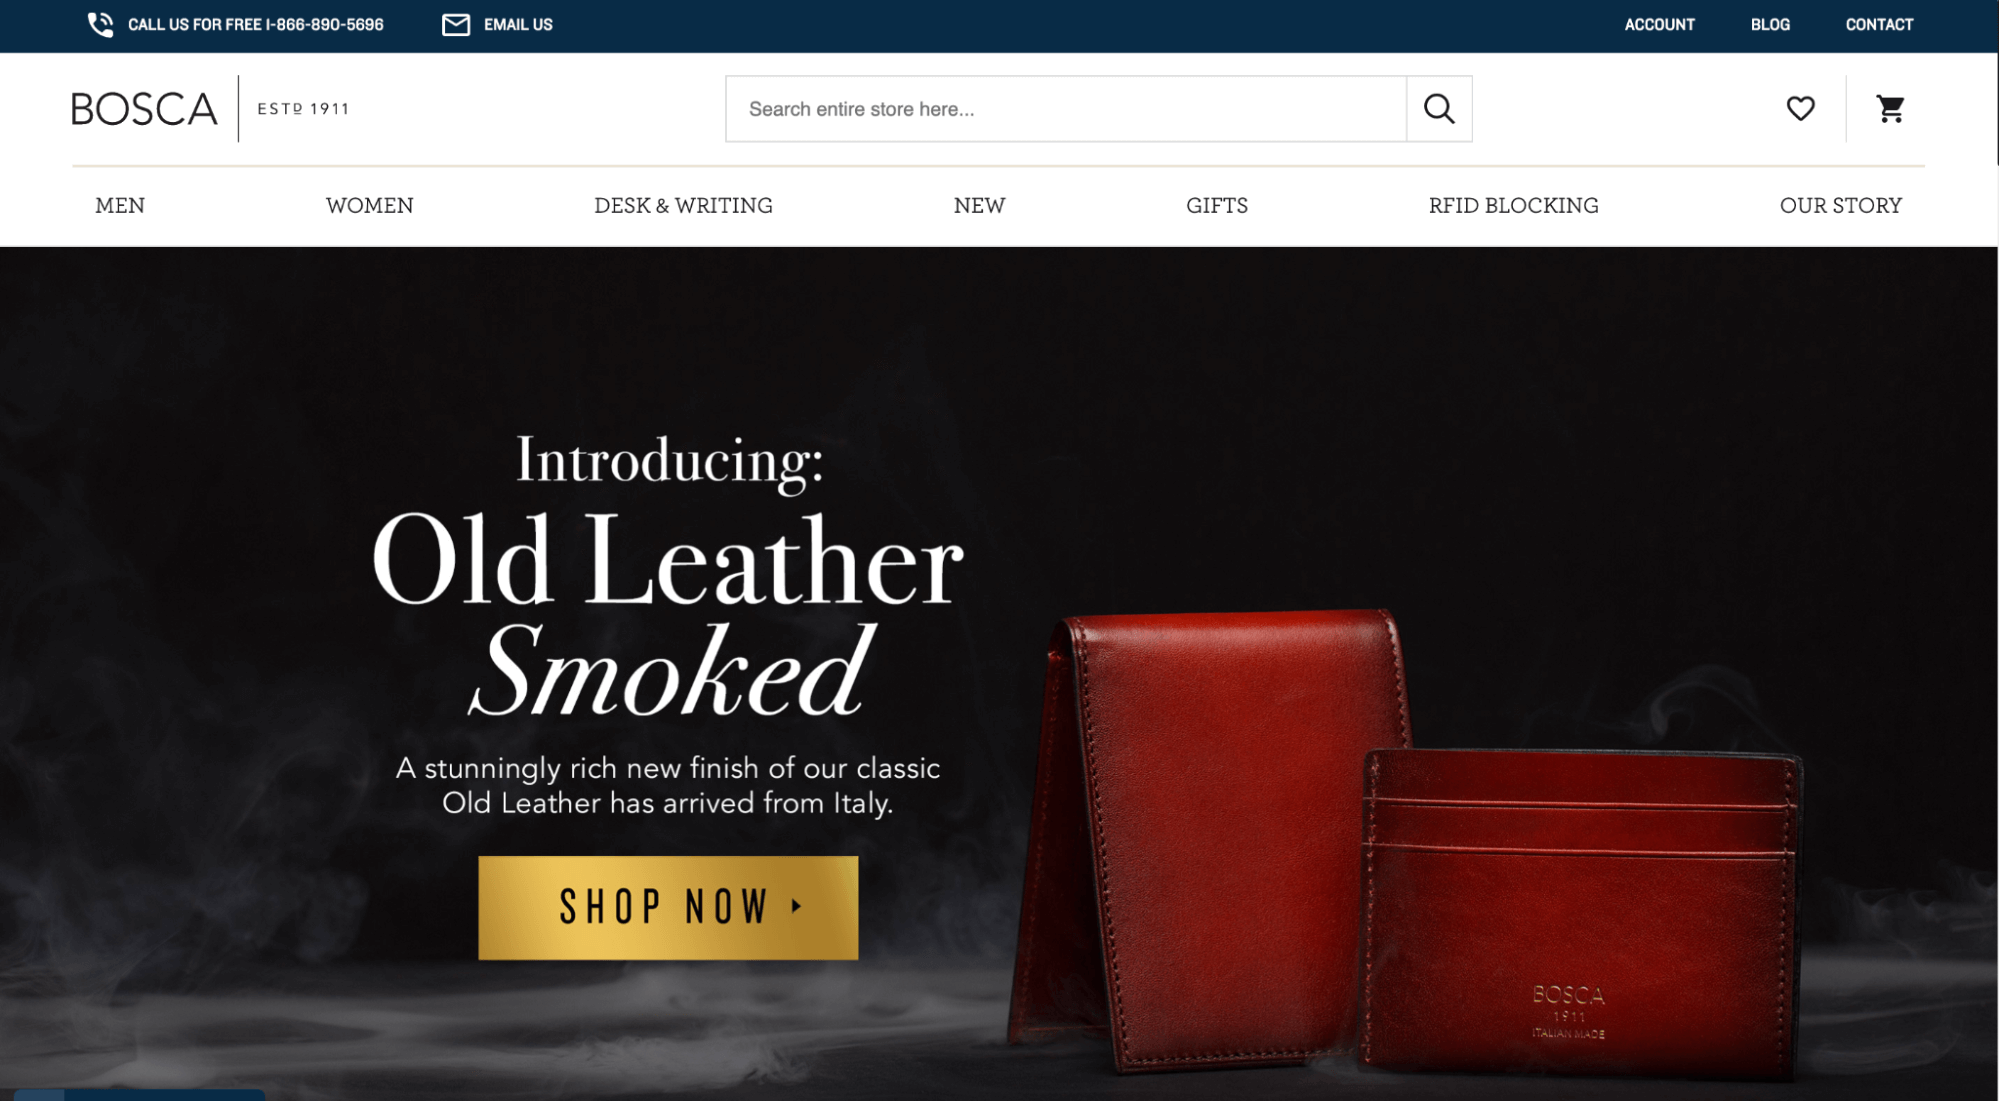 Bosca homepage: Introducing old leather smoked. 